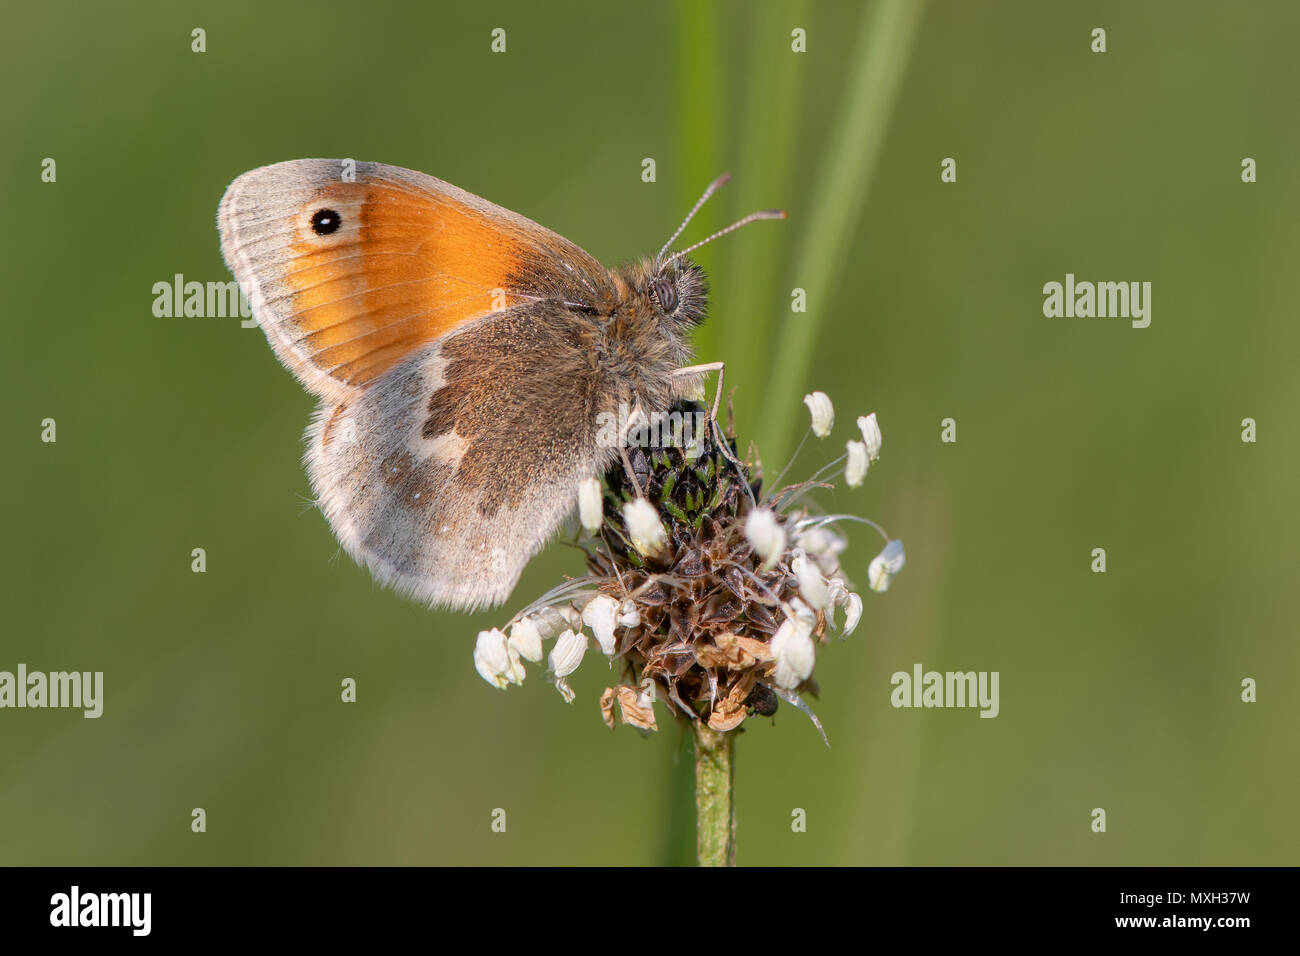 Small heath butterfly (Coenonympha pamphilus) on plantain. Small grassland butterfly in the family Nymphalidae nectaring in Wiltshire, UK Stock Photo